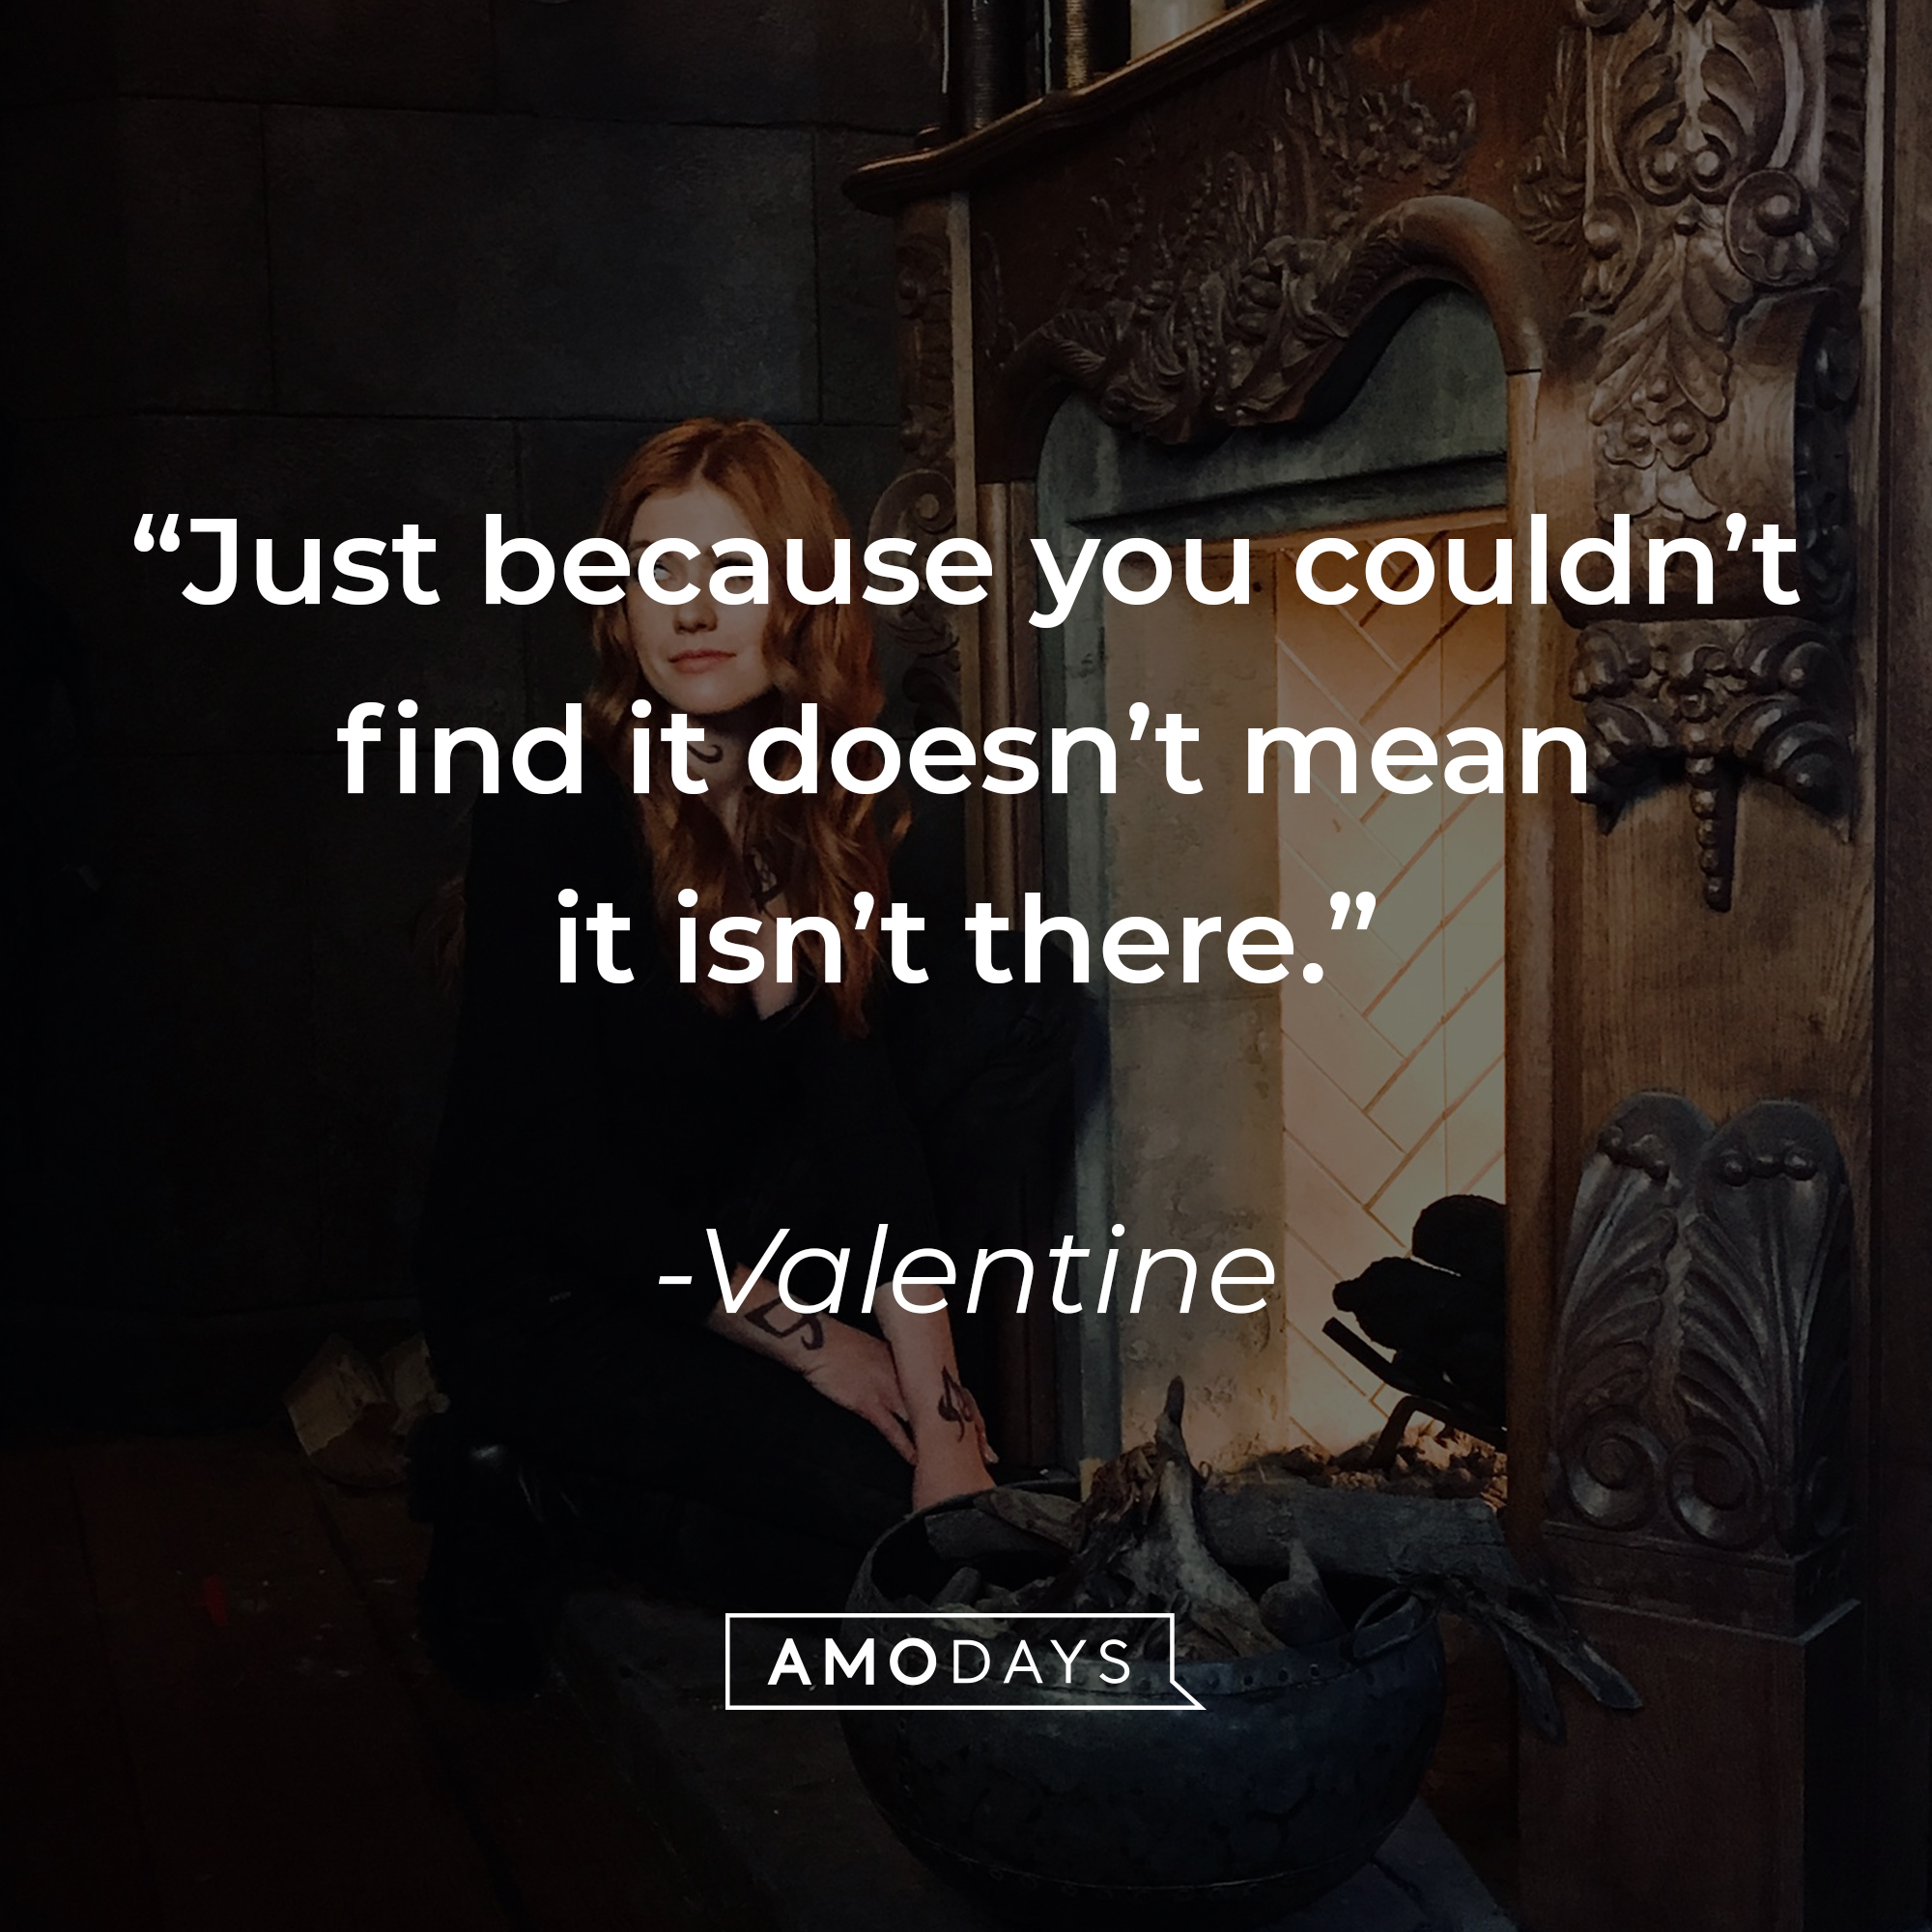 Valentine's quote: "Just because you couldn't find it doesn't mean it isn't there."┃Source: facebook.com/ShadowhuntersSeries